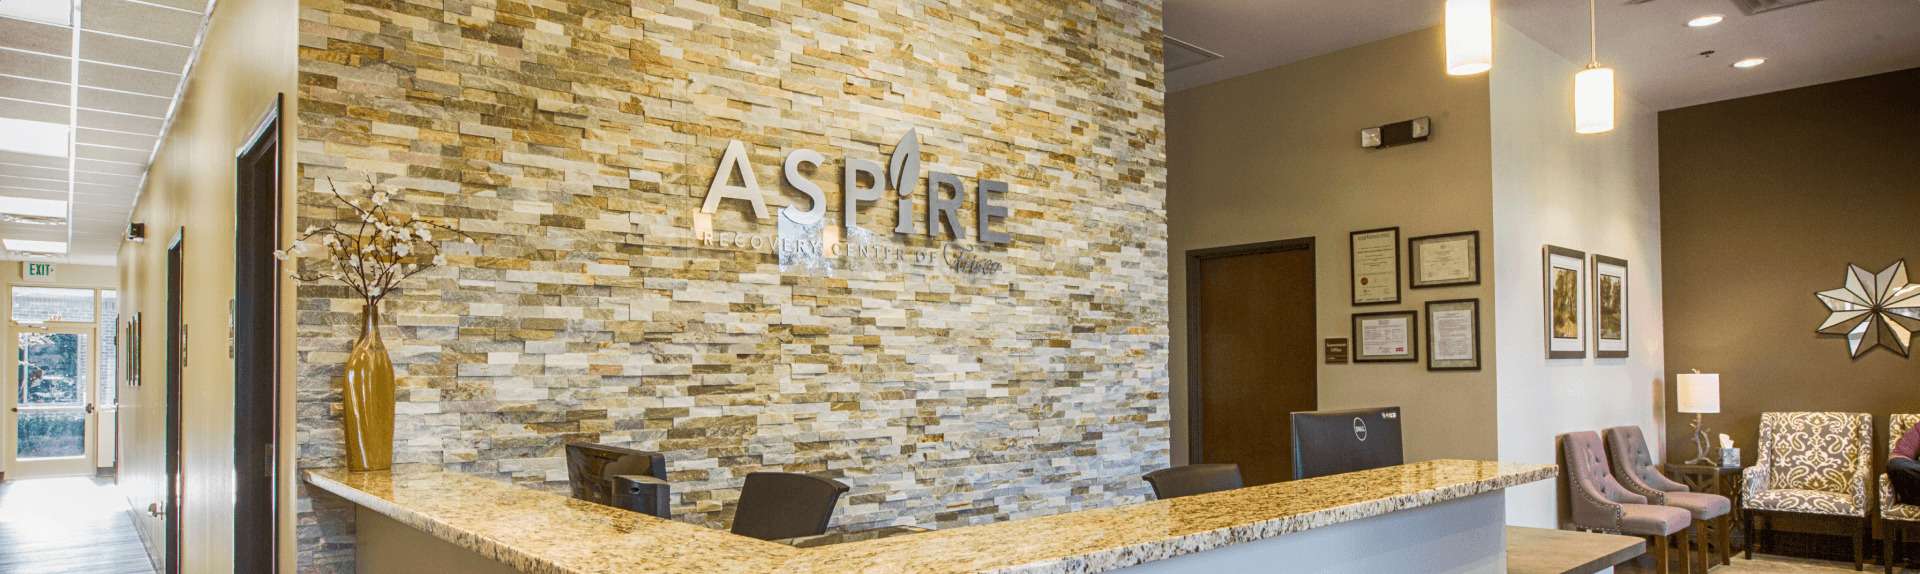 Aspire Recovery Center of Frisco Front Desk